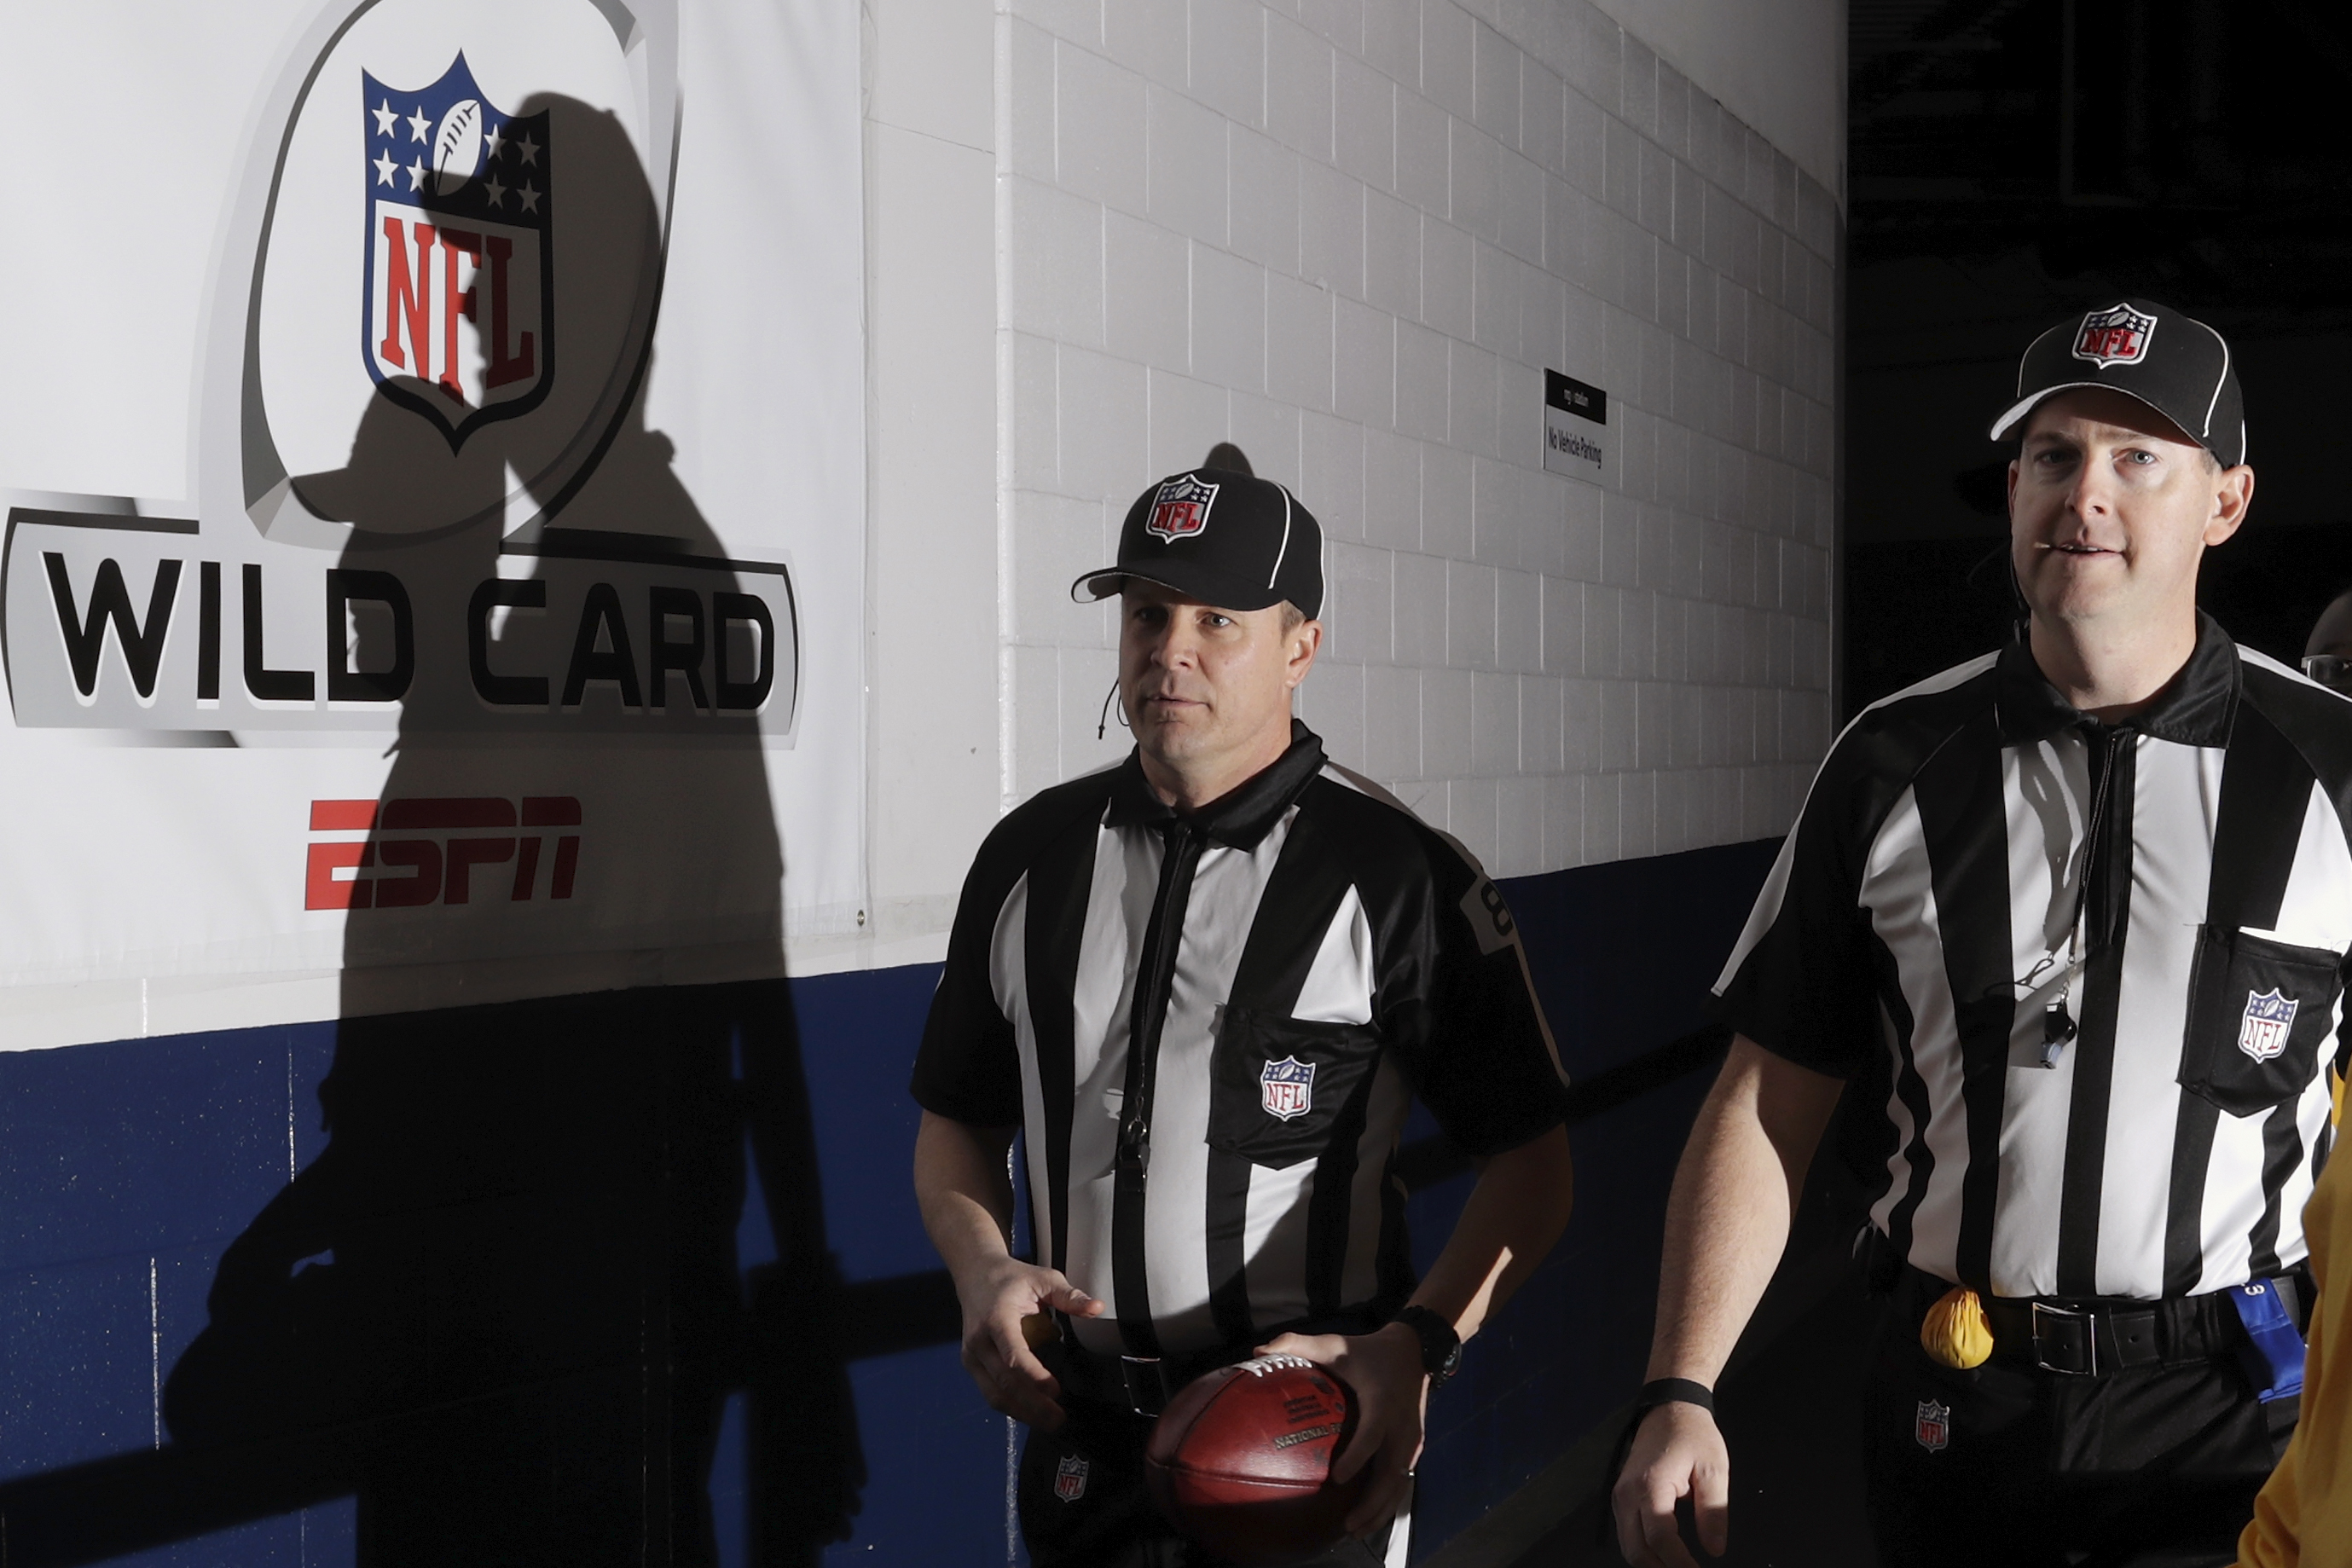 HOUSTON, TX - JANUARY 07: Back judge Shawn  Hochuli #83 and side judge Allen Baynes #56 carry a game ball to the Oakland Raiders locker room before the game against the Houston Texans at NRG Stadium on January 7, 2017 in Houston, Texas. (Photo by Tim Warner/Getty Images)